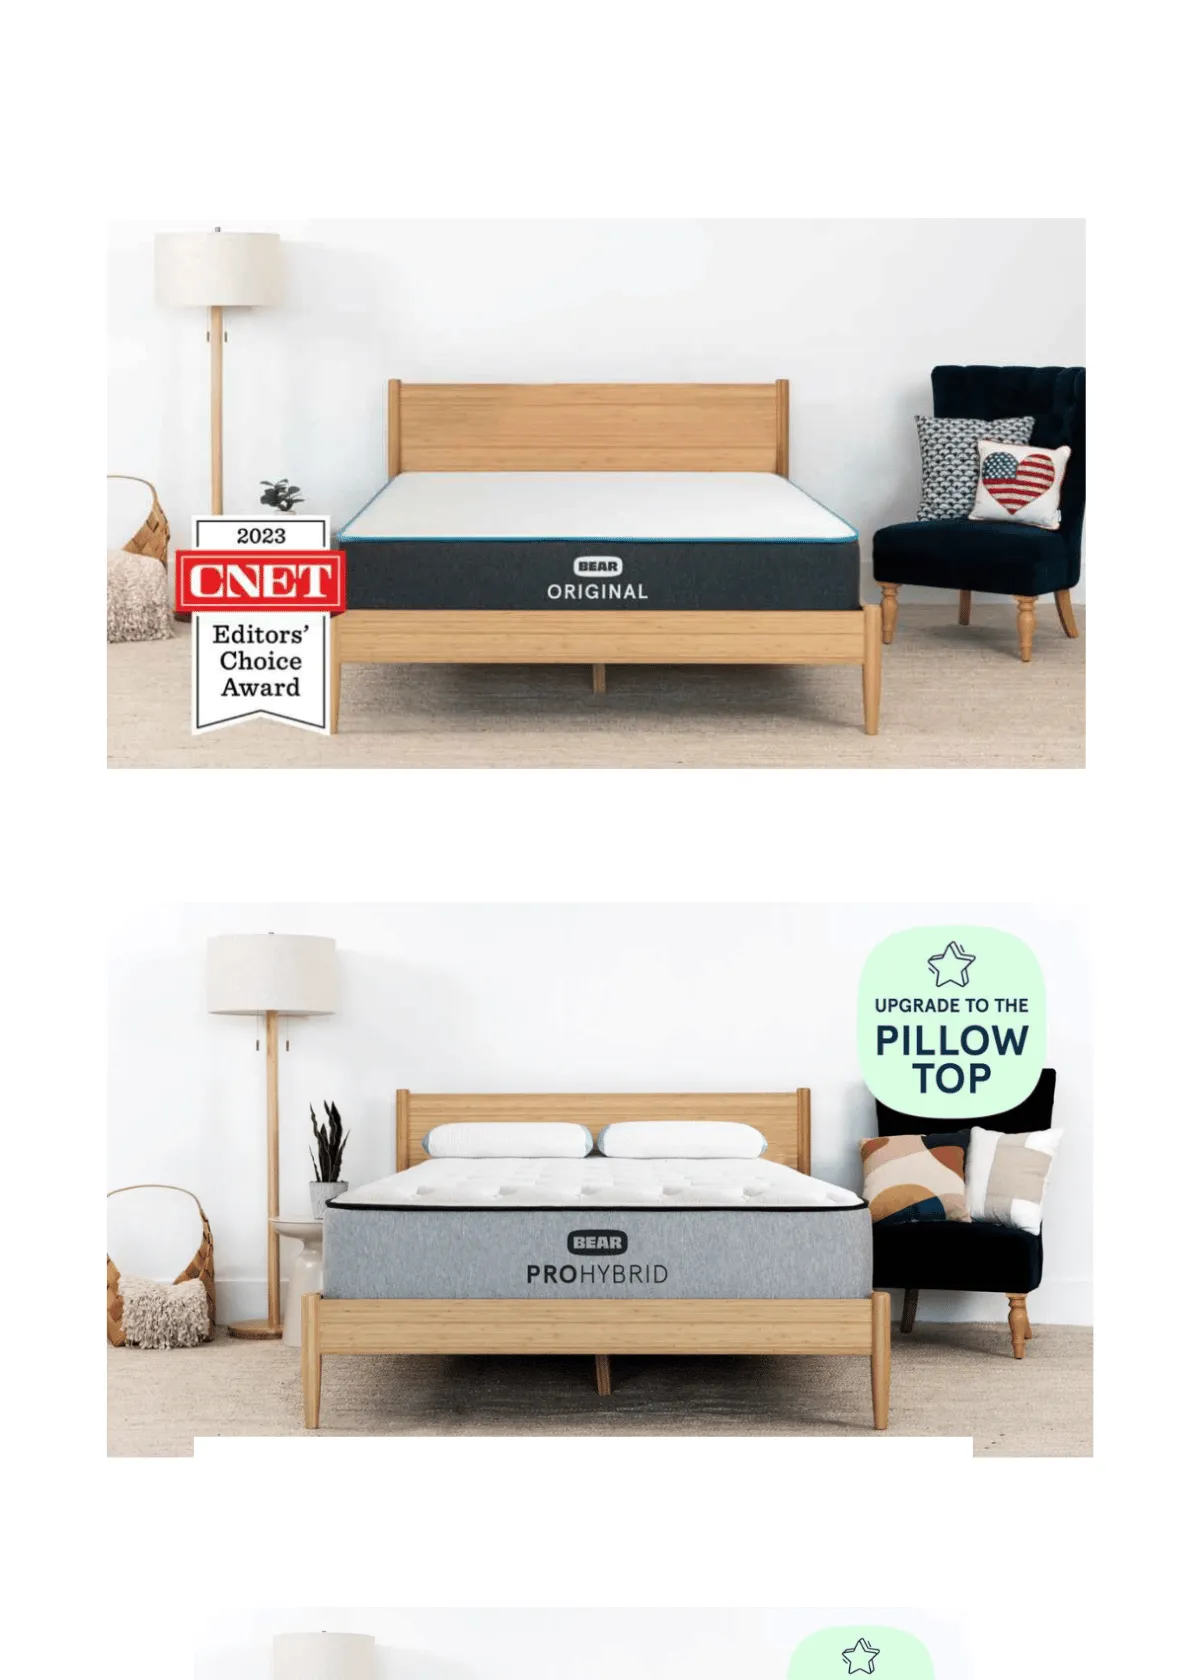 "Bear Mattress | The Most Comfortable Beds For Side Sleepers"